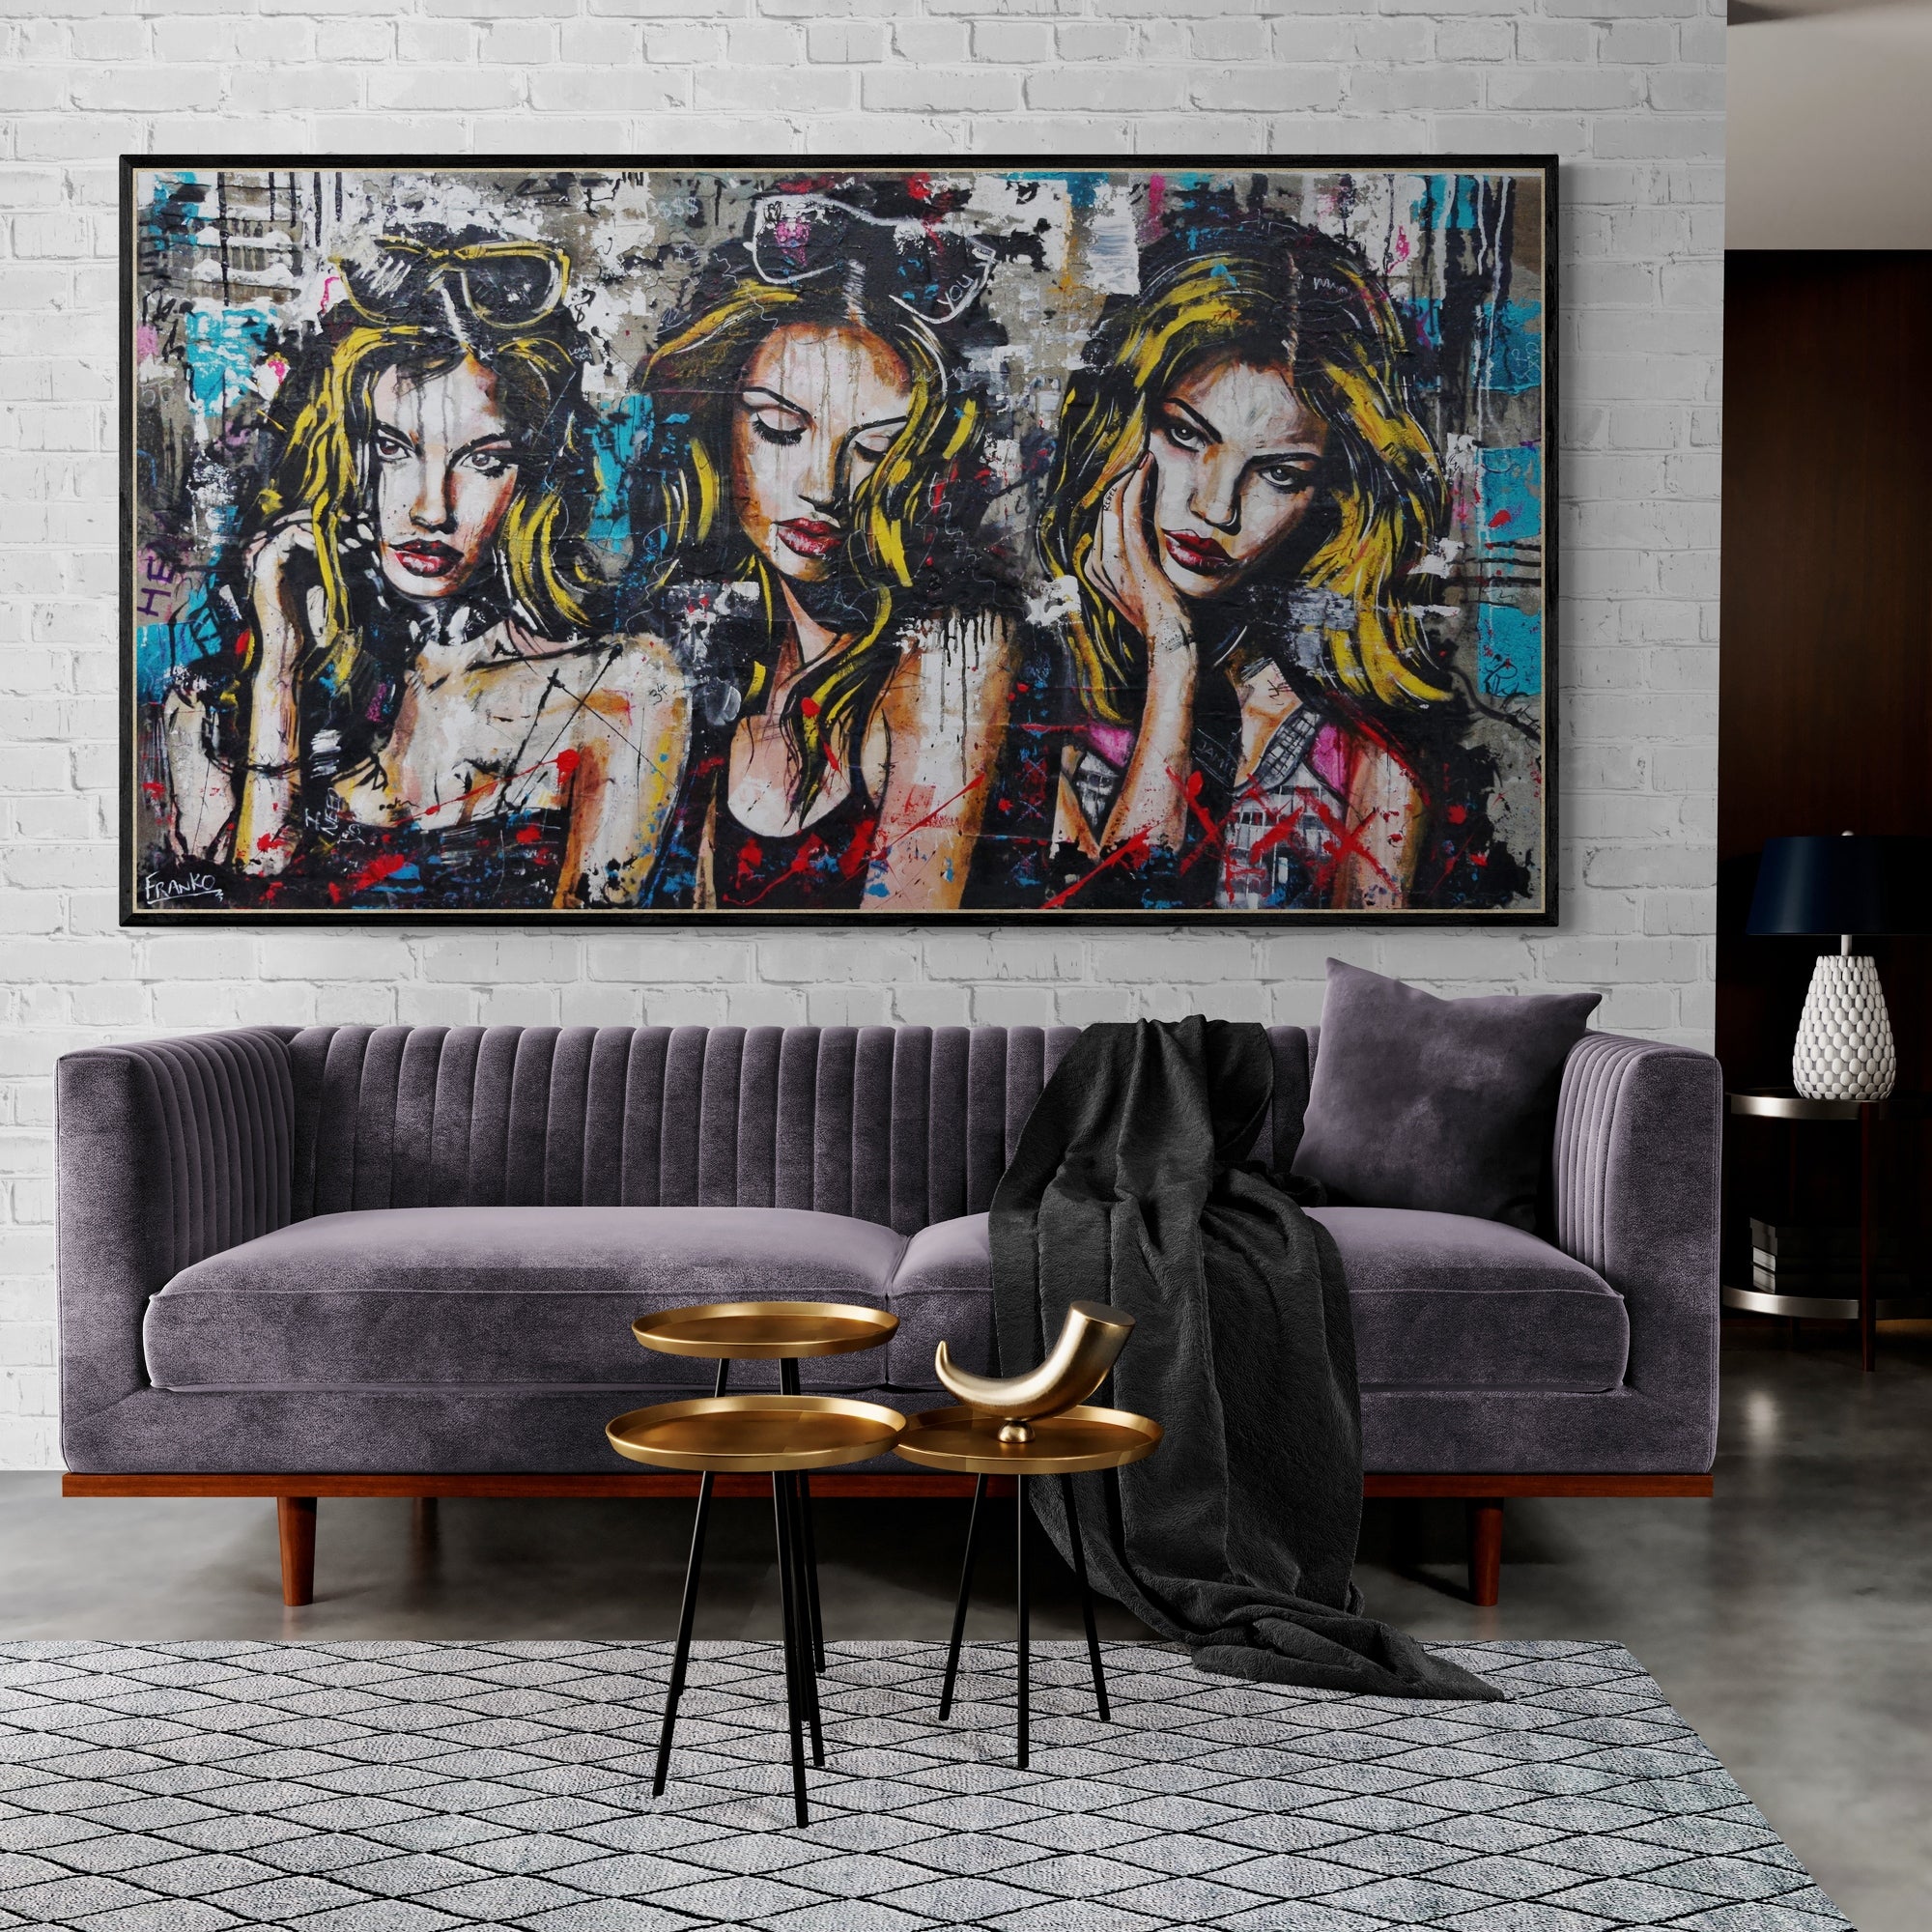 Raw Fates 190cm x 100cm Sultry Concrete Textured Industrial Urban Pop Art Painting (SOLD)